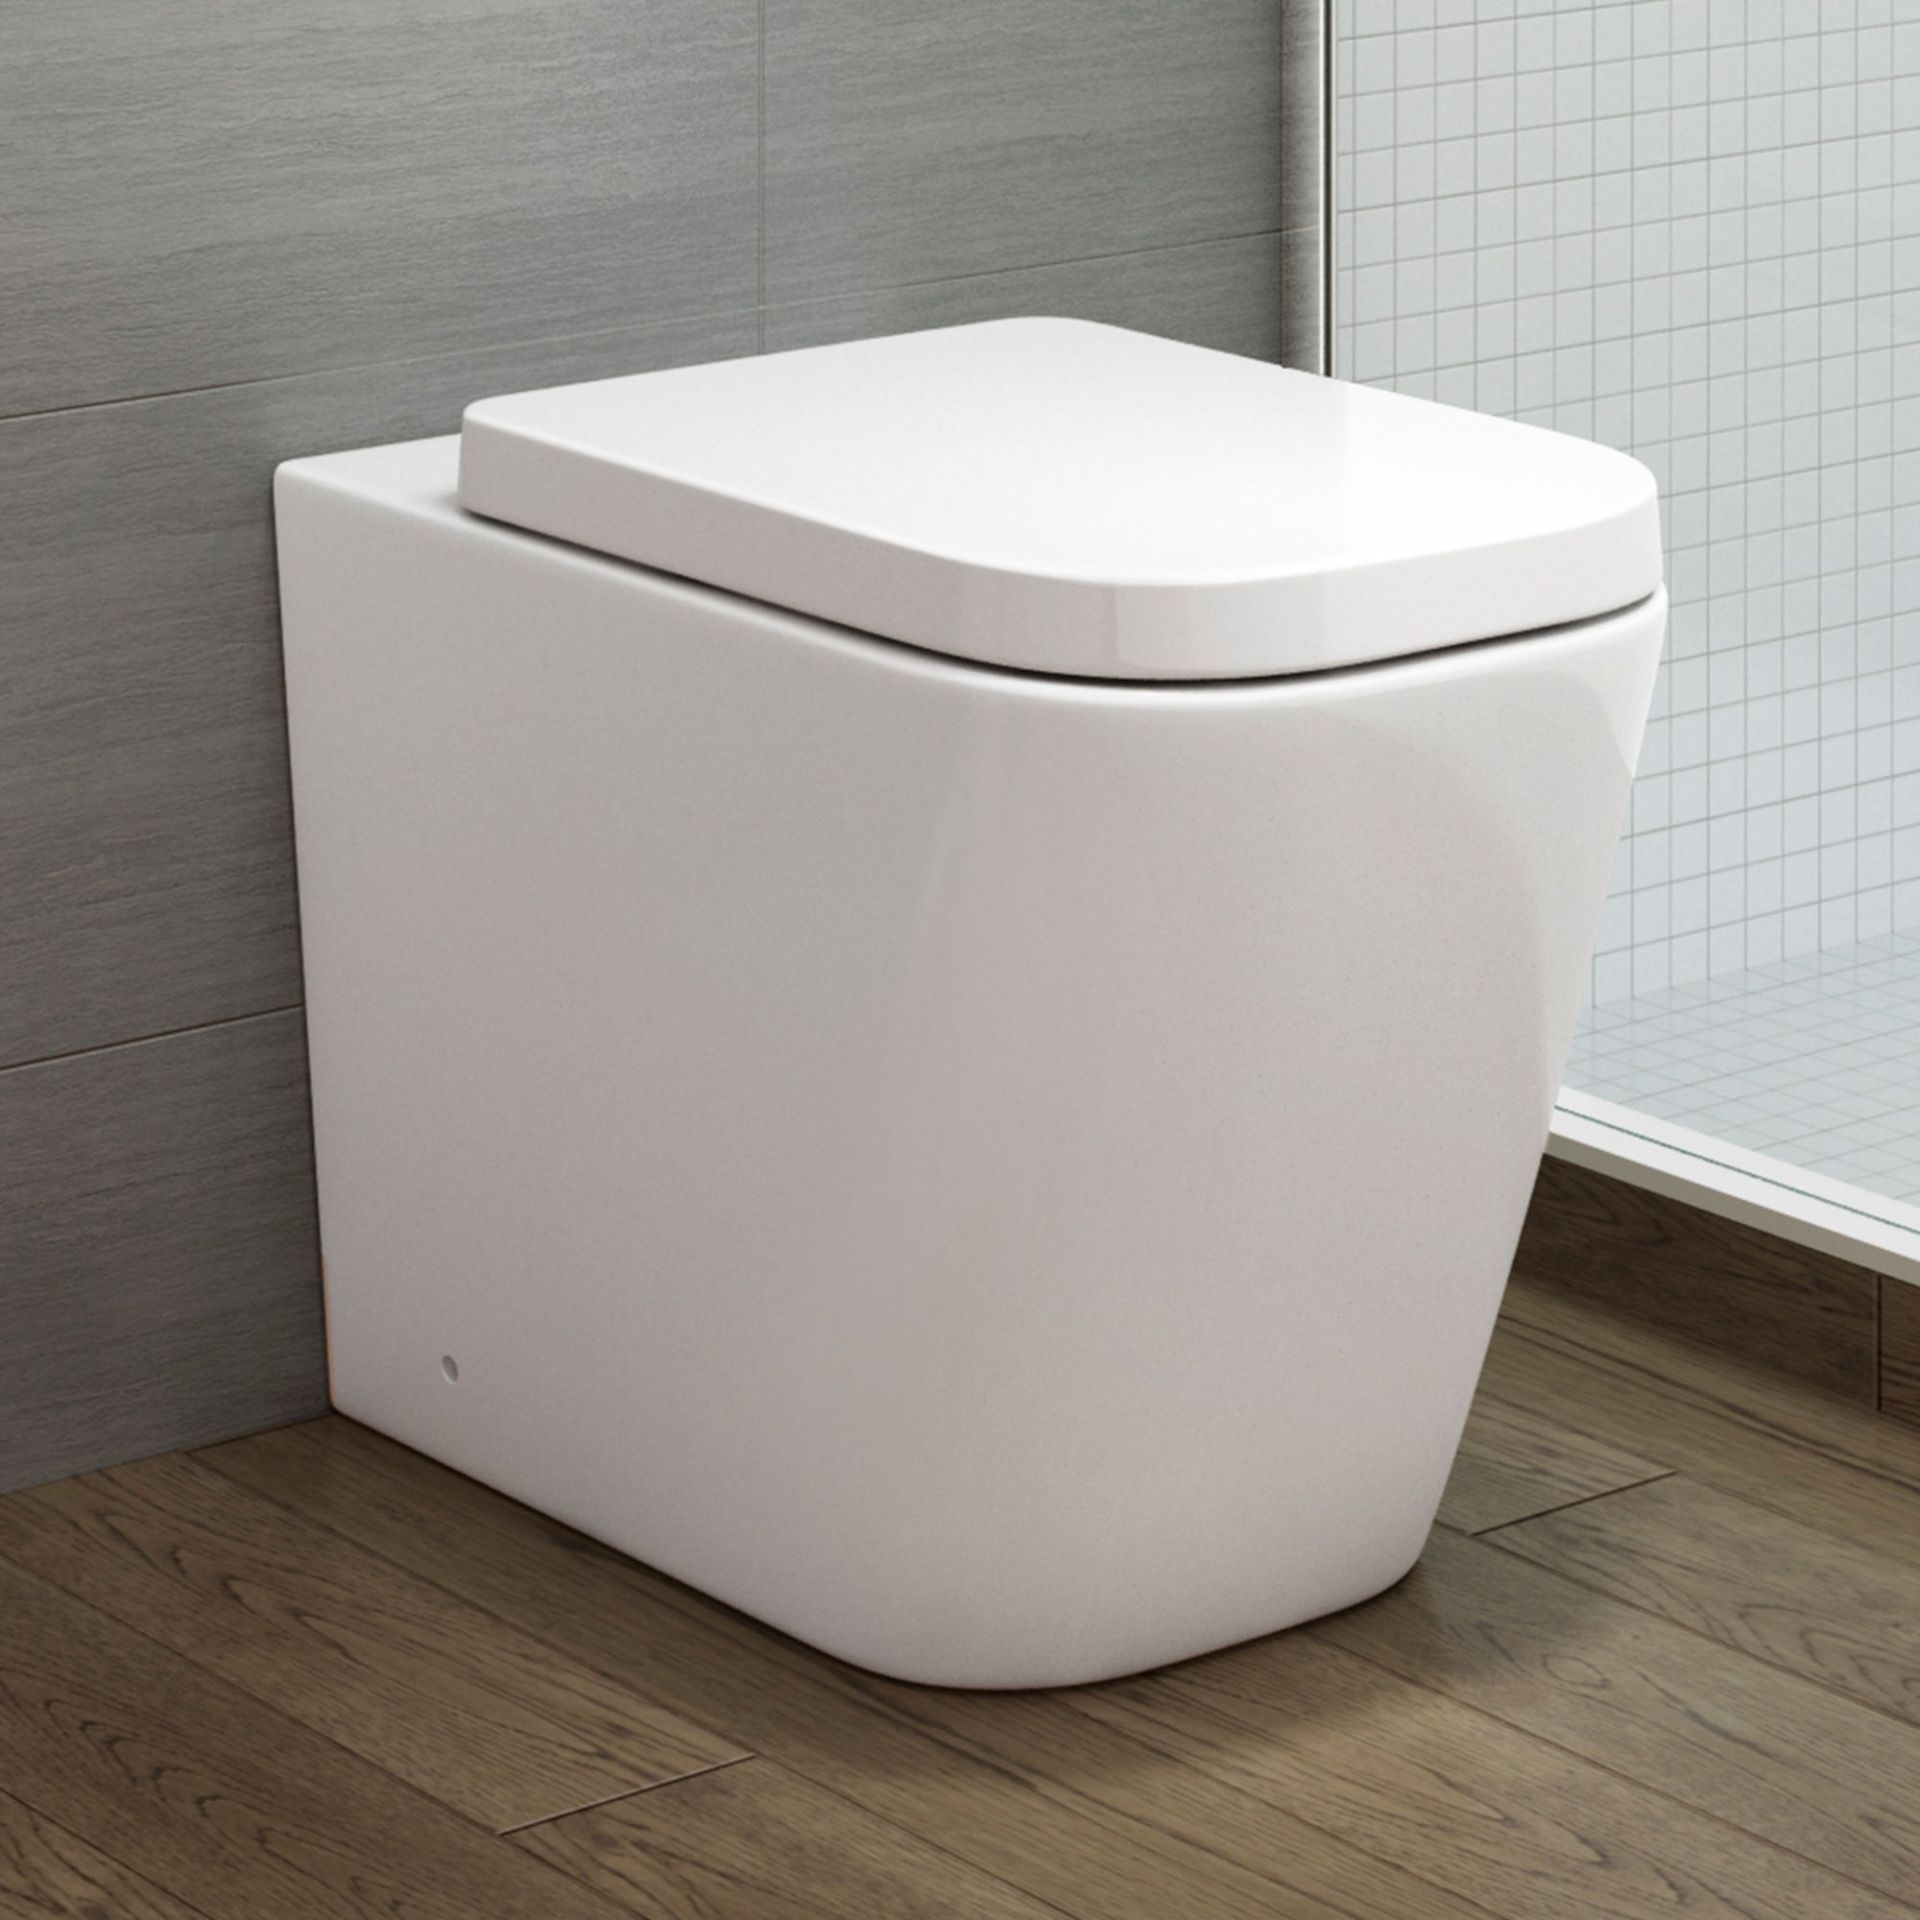 New Florence Rimless Back To Wall Toilet Inc Luxury Soft Close Seat Rimless Design Makes I...